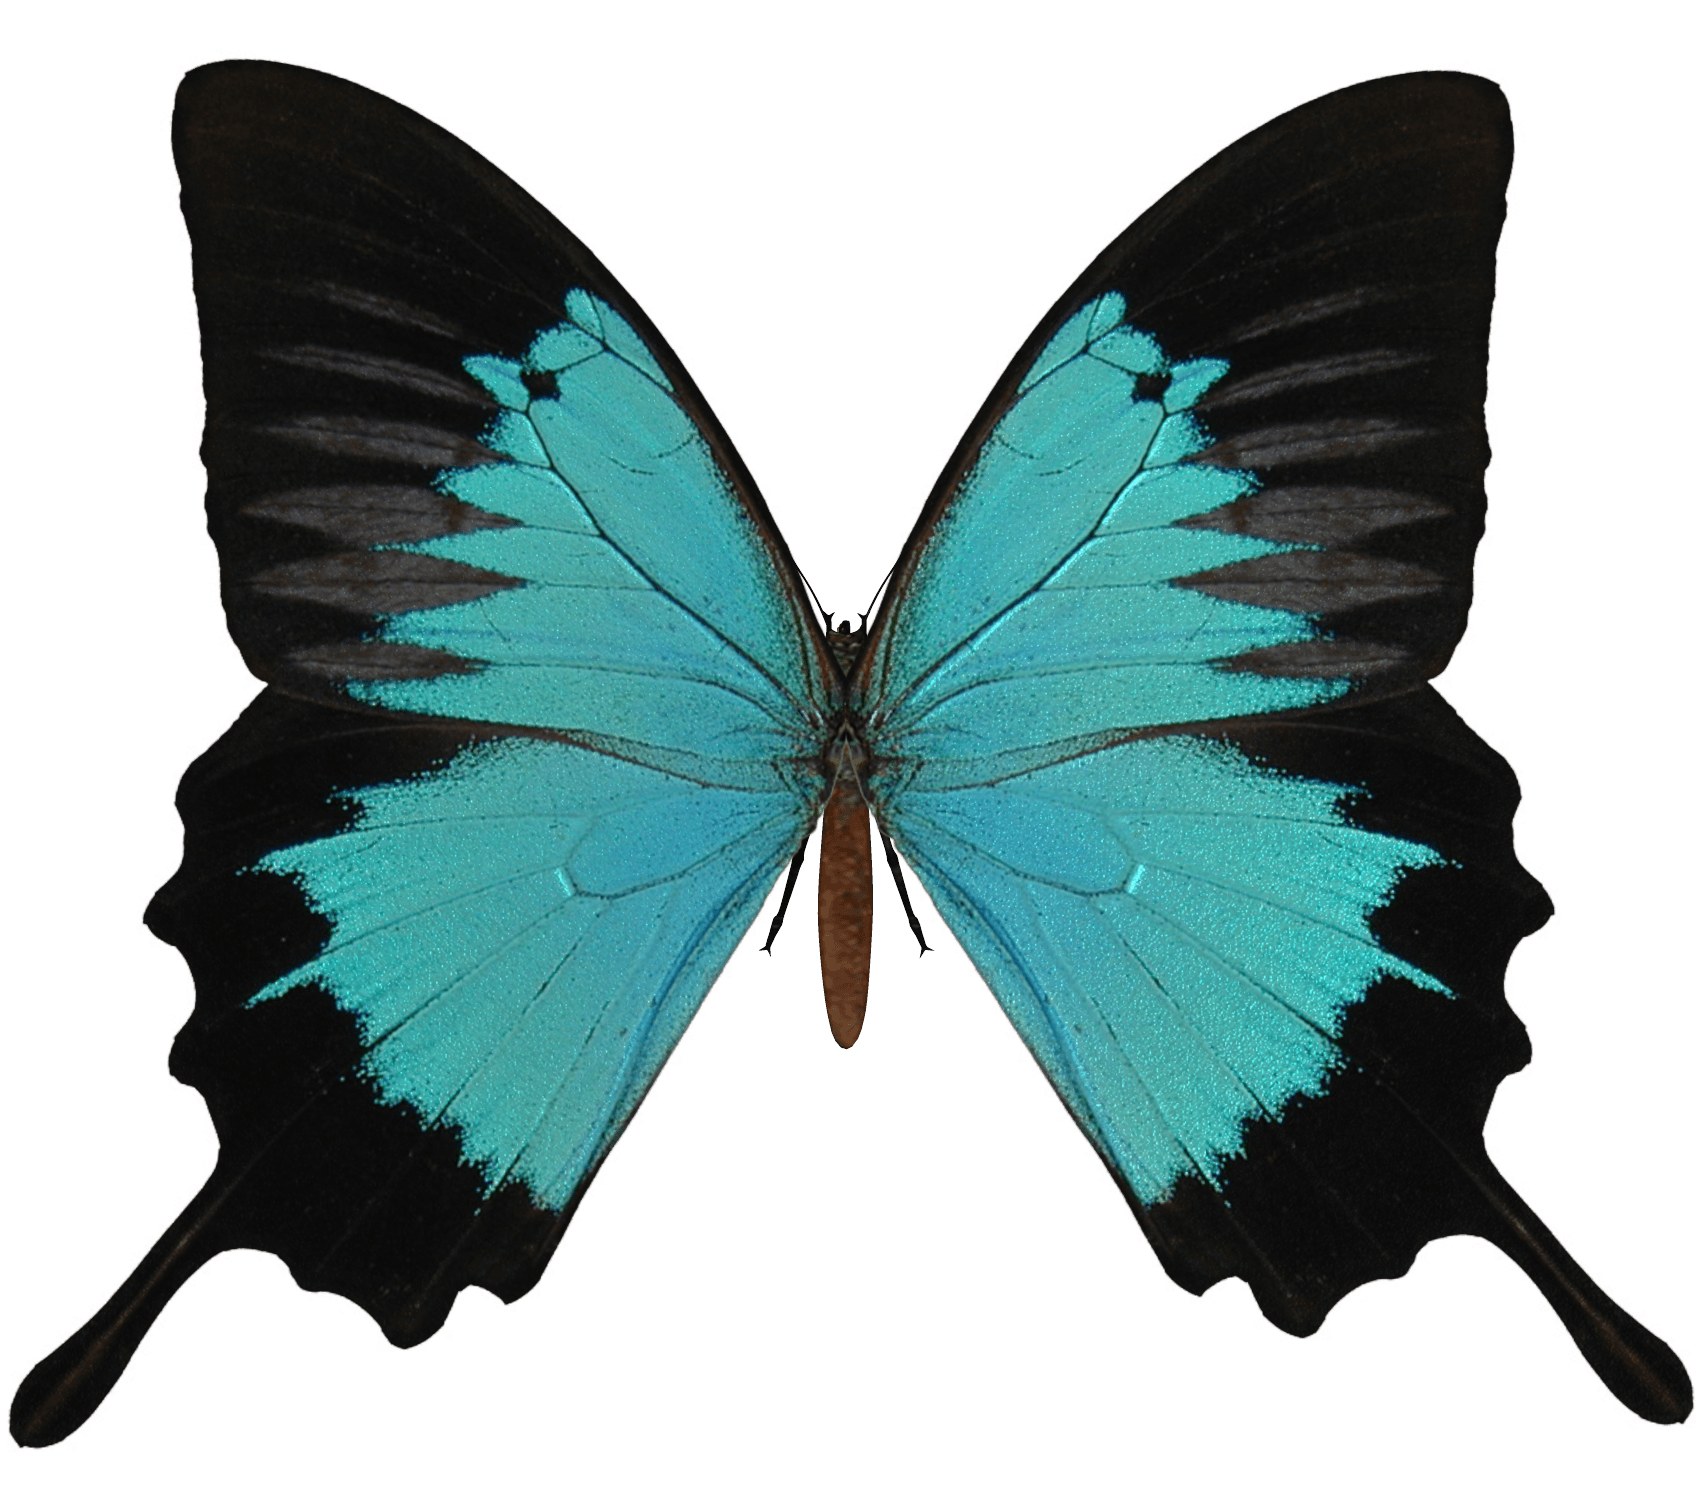 Download Butterfly Png Image HQ PNG Image | FreePNGImg